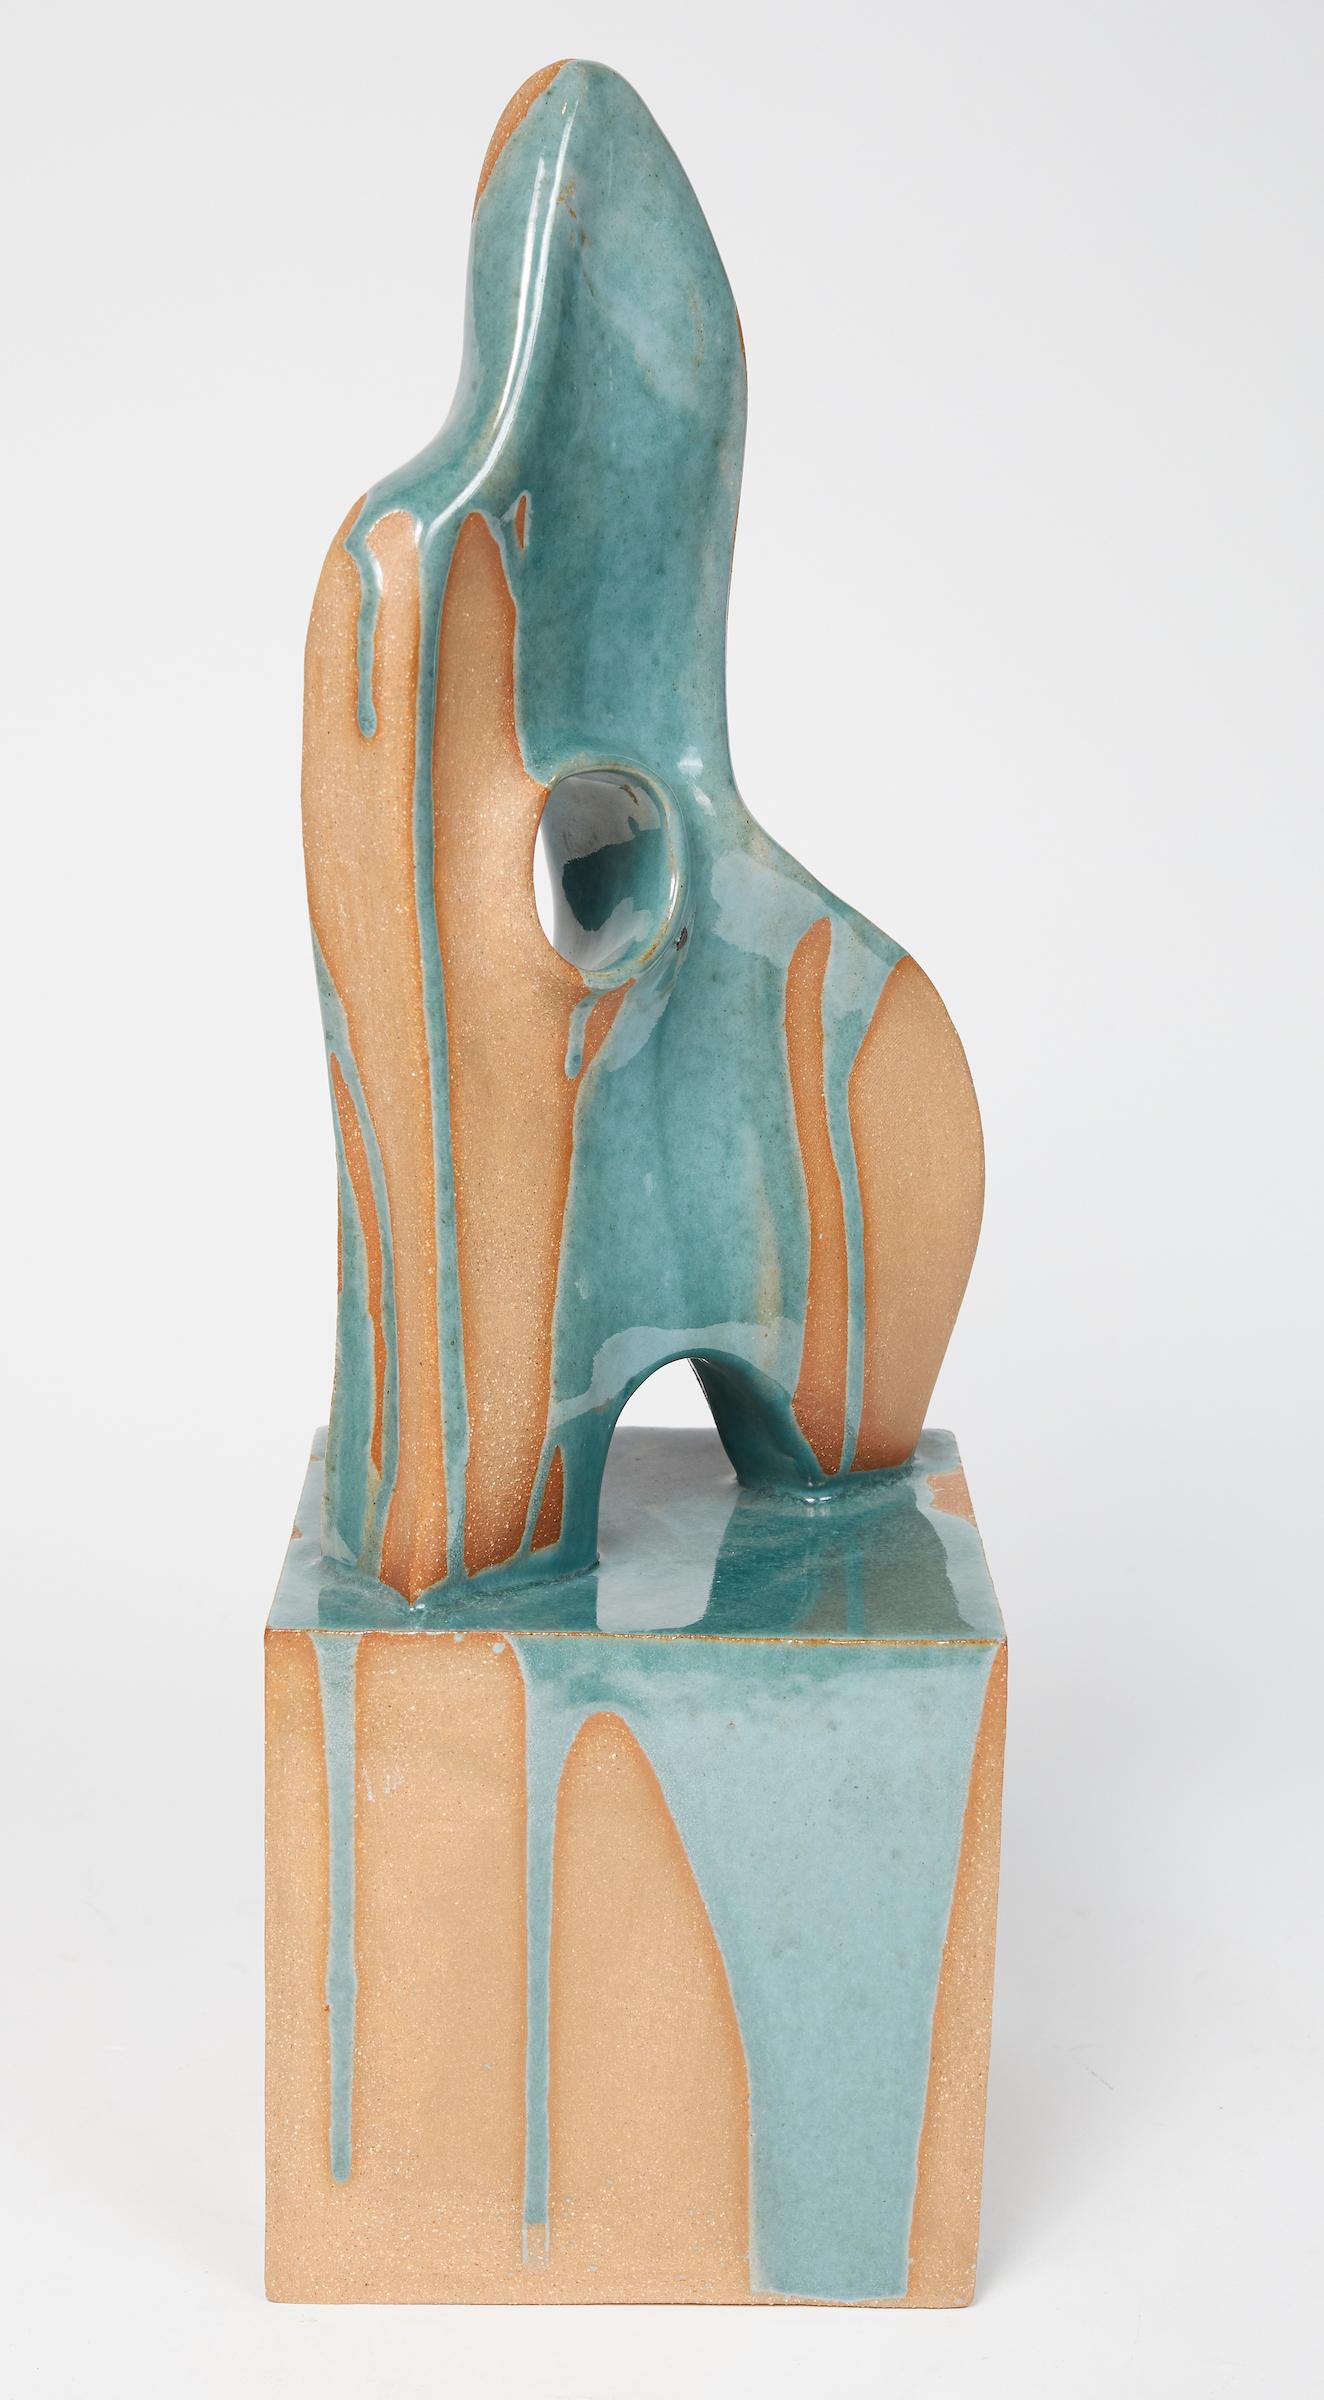 Canadian Dripping Glazed Ceramic Abstract Sculpture